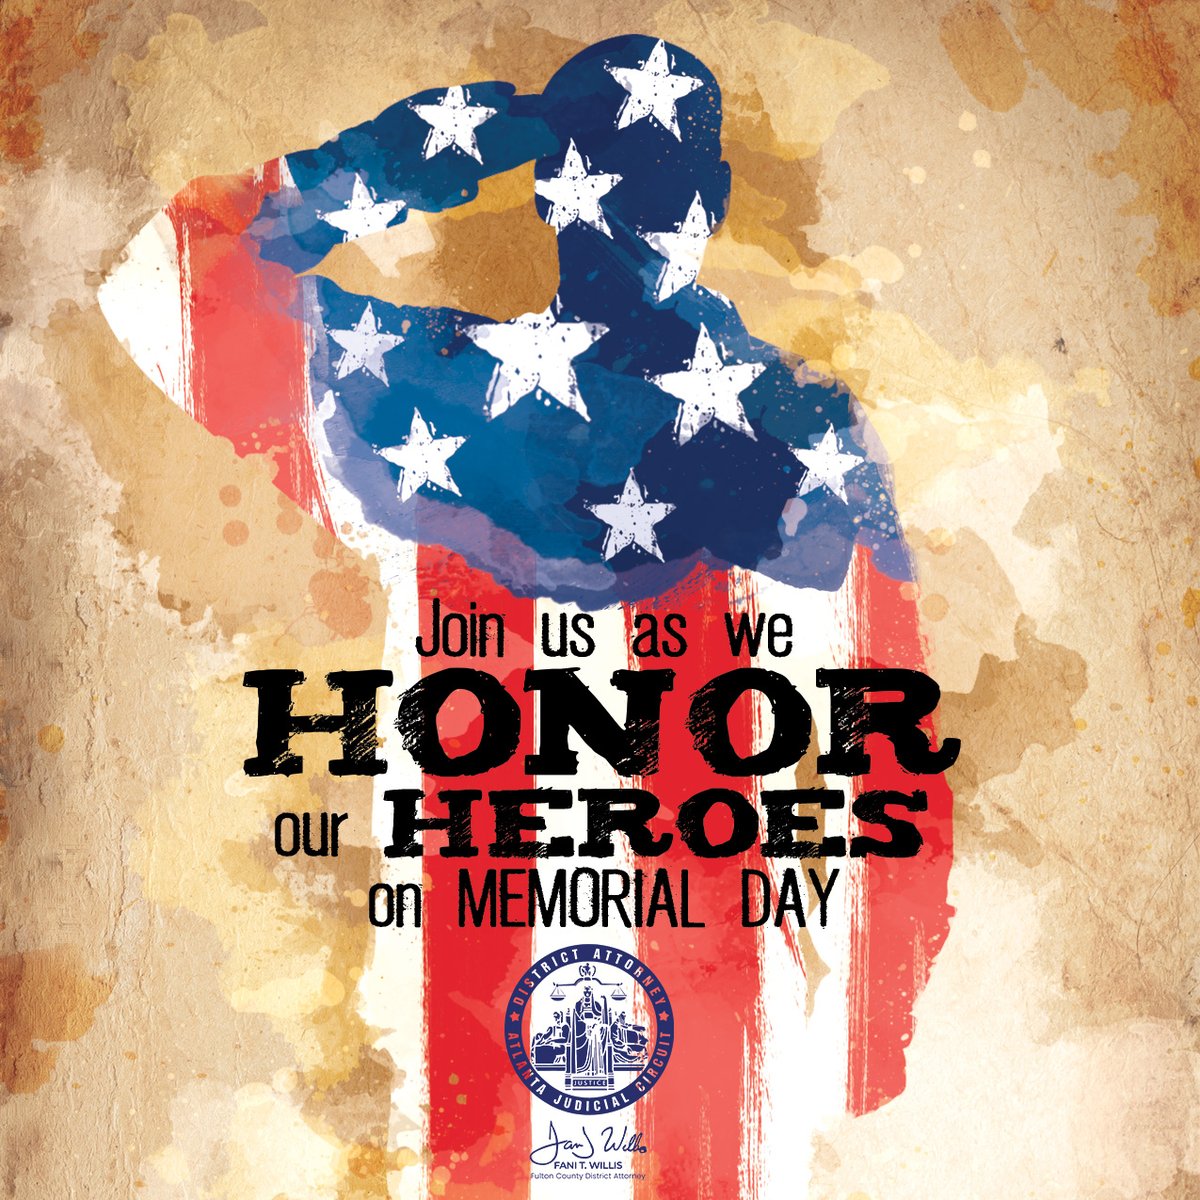 Honoring those who made the ultimate sacrifice for our country. Their courage inspires us as we pursue justice. Grateful for all who served.

#MemorialDay #HonorAndRemember #NeverForget #ServiceAndSacrifice #Gratitude #FultonCounty #FultonCountyDA